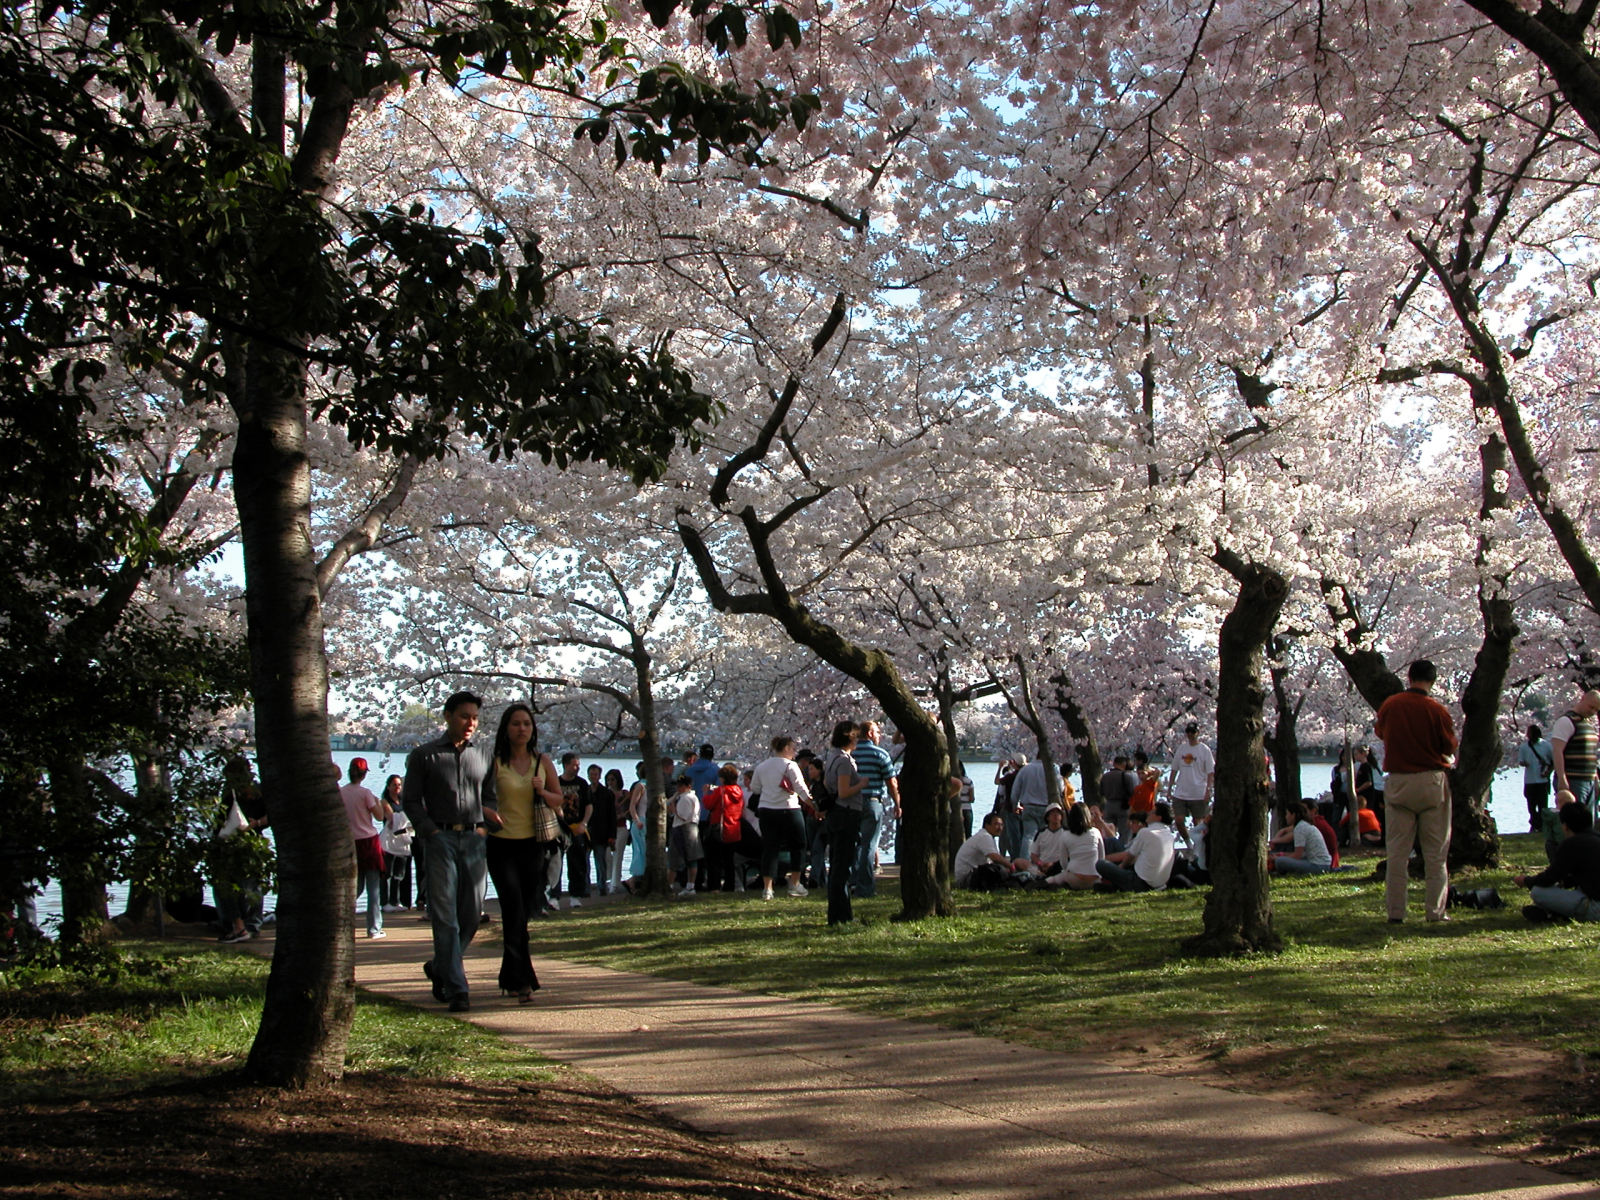 Crowd of people under blooming cherry trees with a couple walking along a path as the focus. A sliver of the Tidal Basin can be seen in the background.